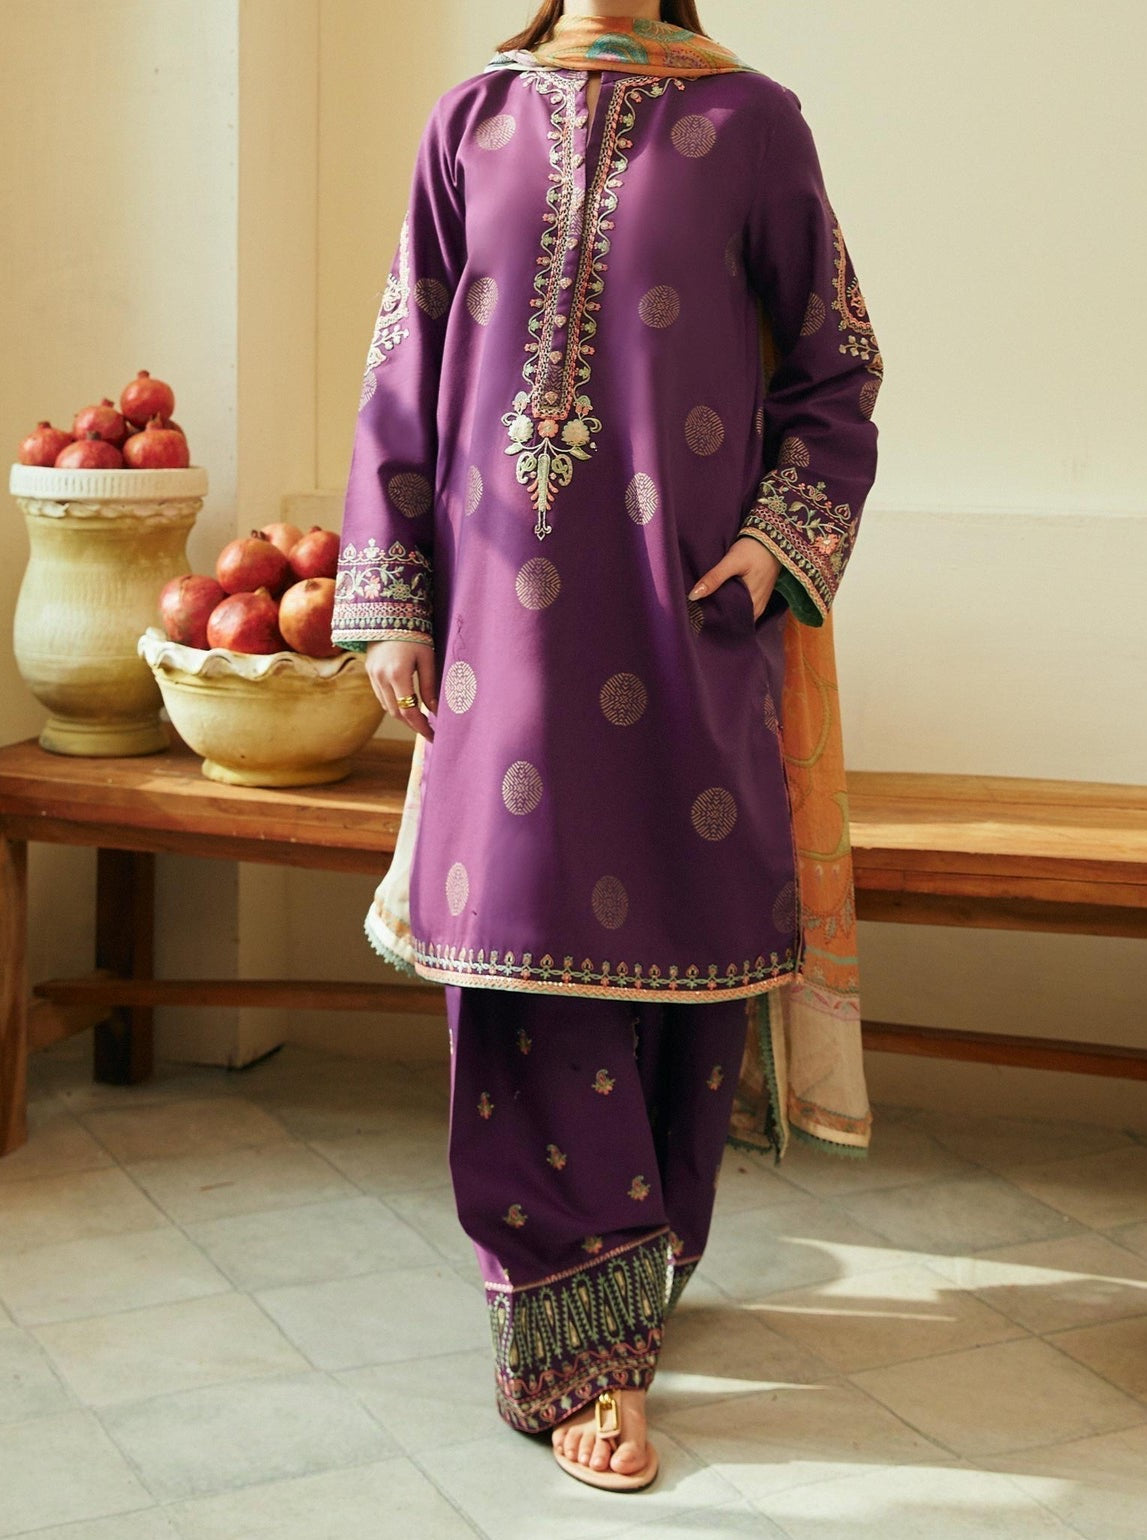 Grace S615-Embroidered 3pc Lawn dress with Printed Munar dupatta.